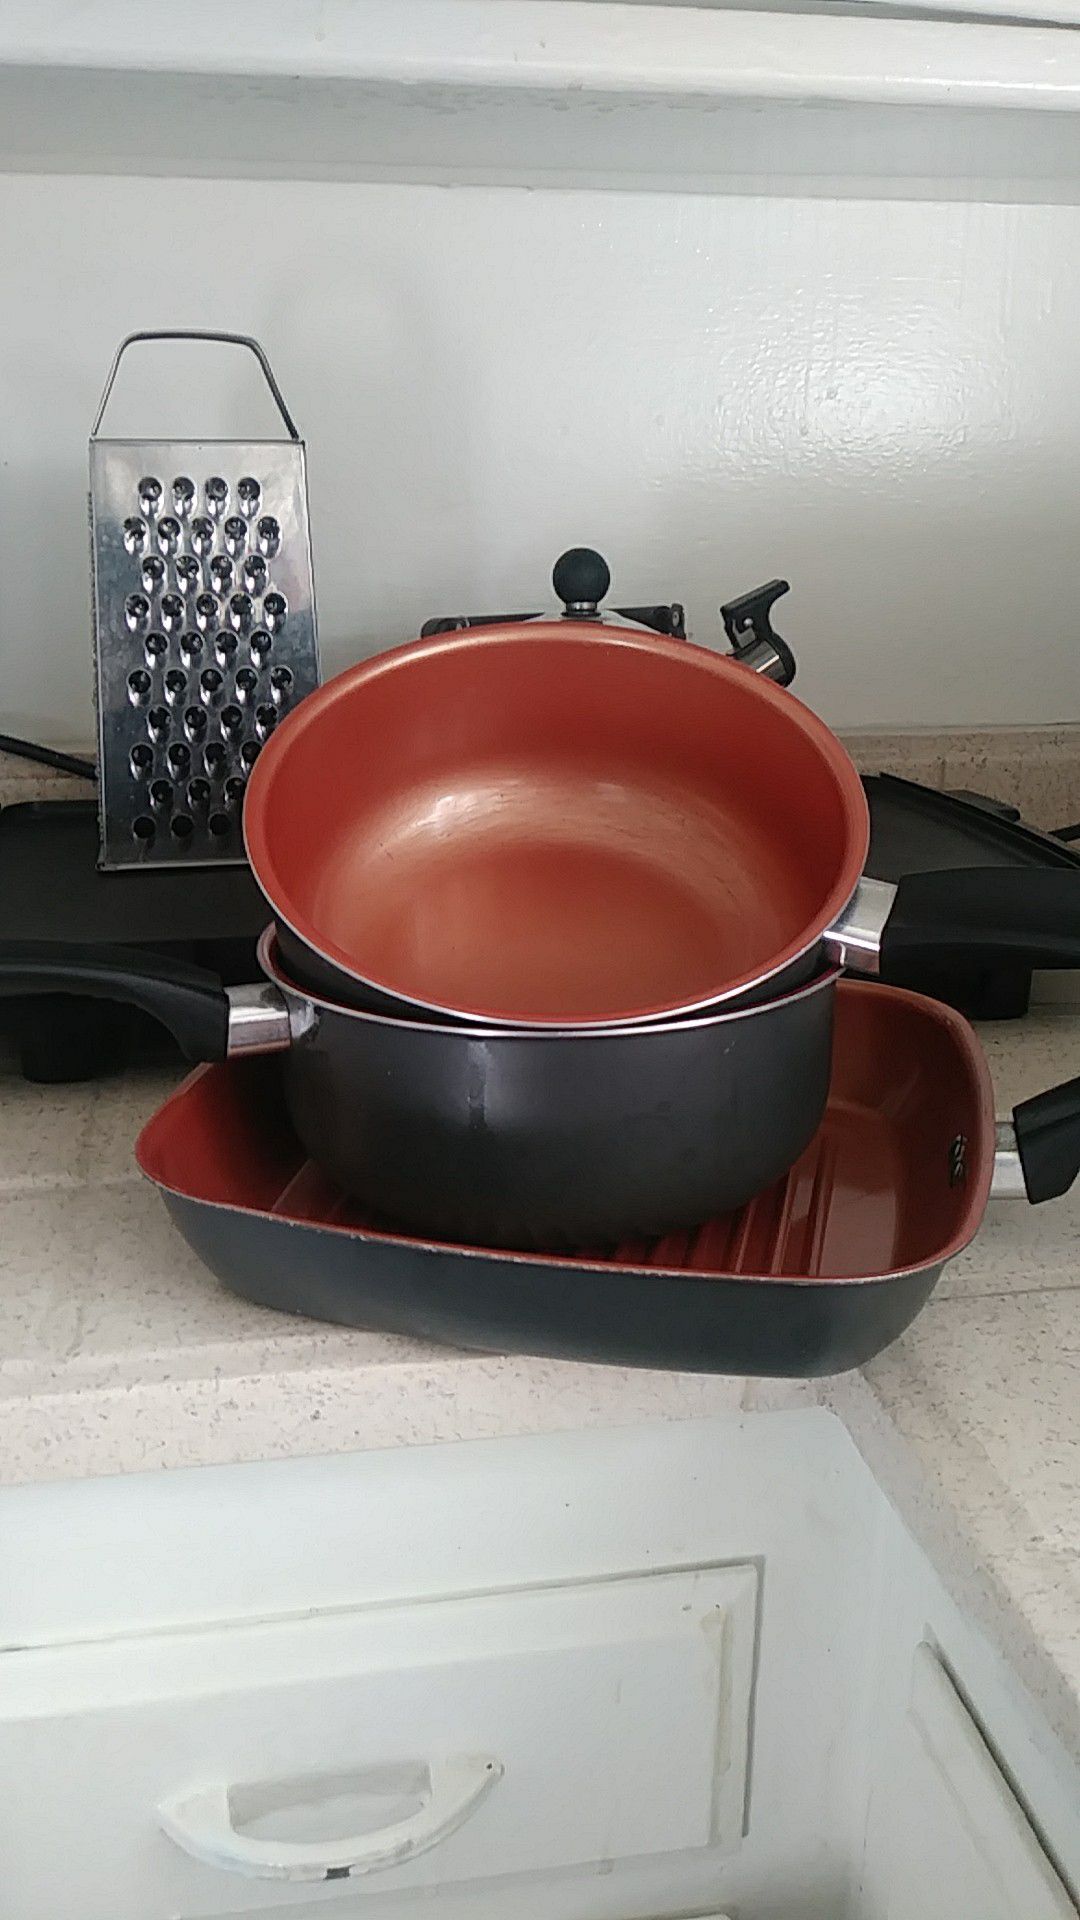 Stainless steel copper Finnish pot set with skillet